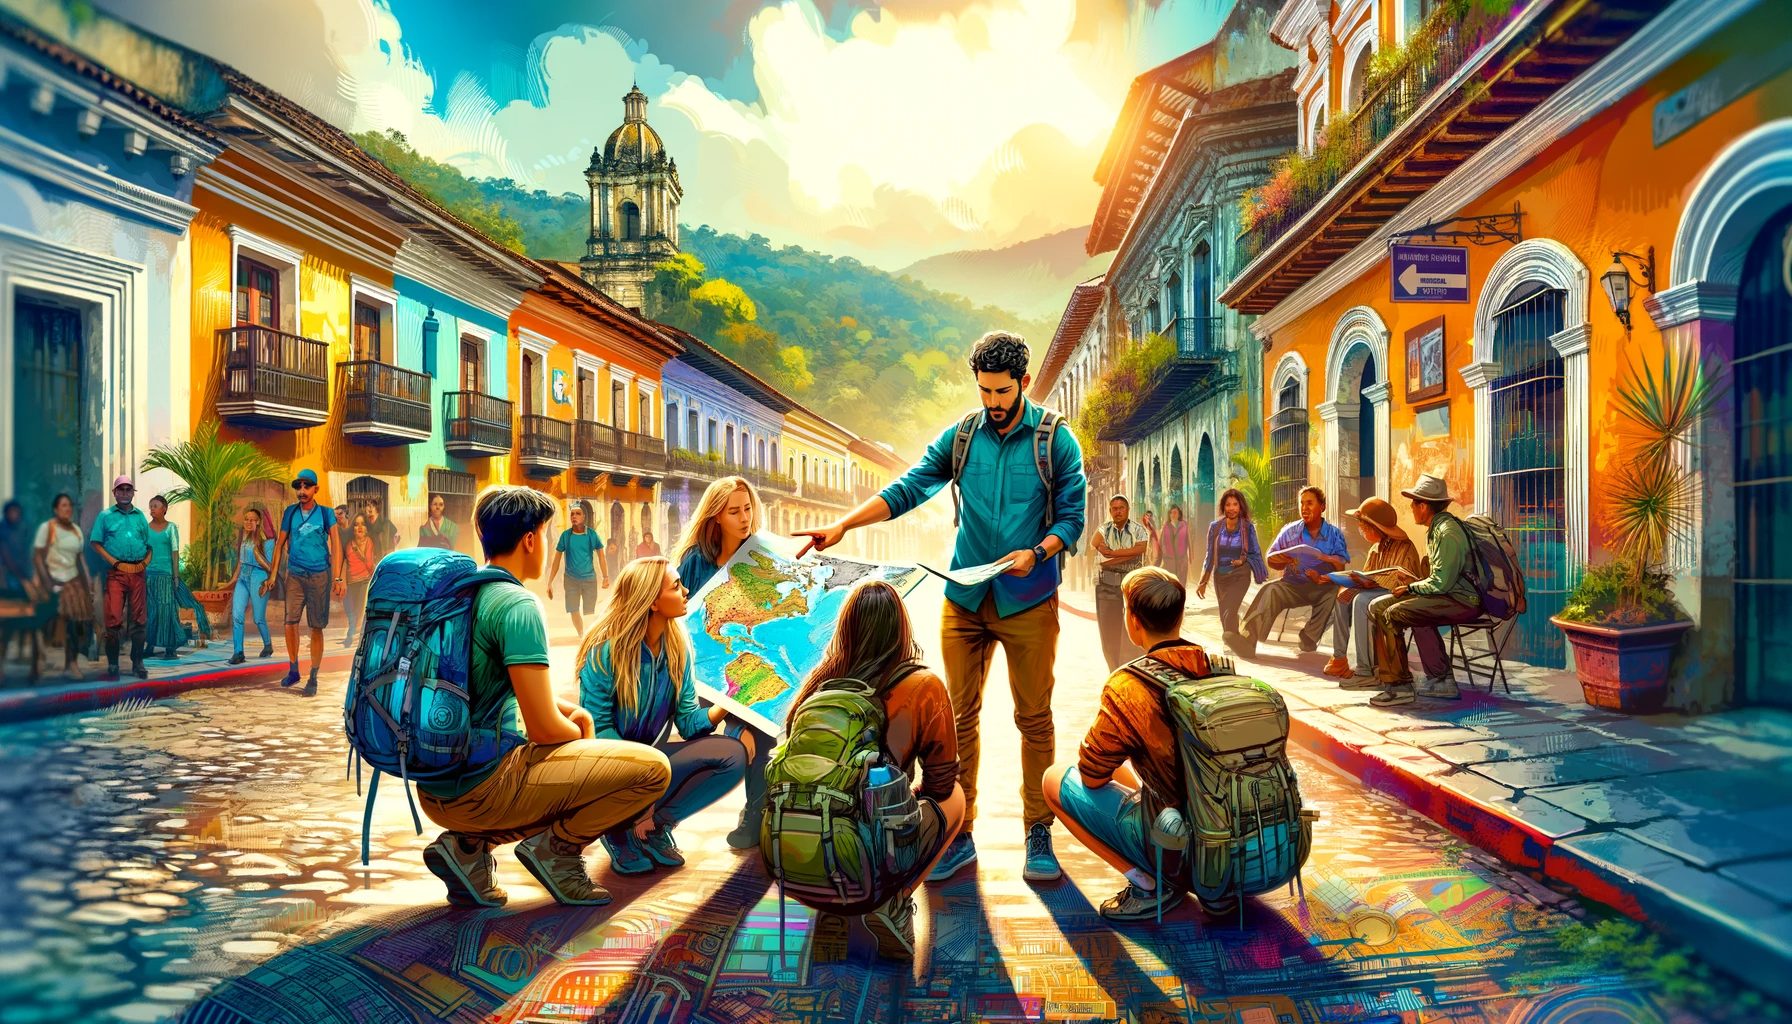 Colorful street with travelers and locals, colonial architecture.